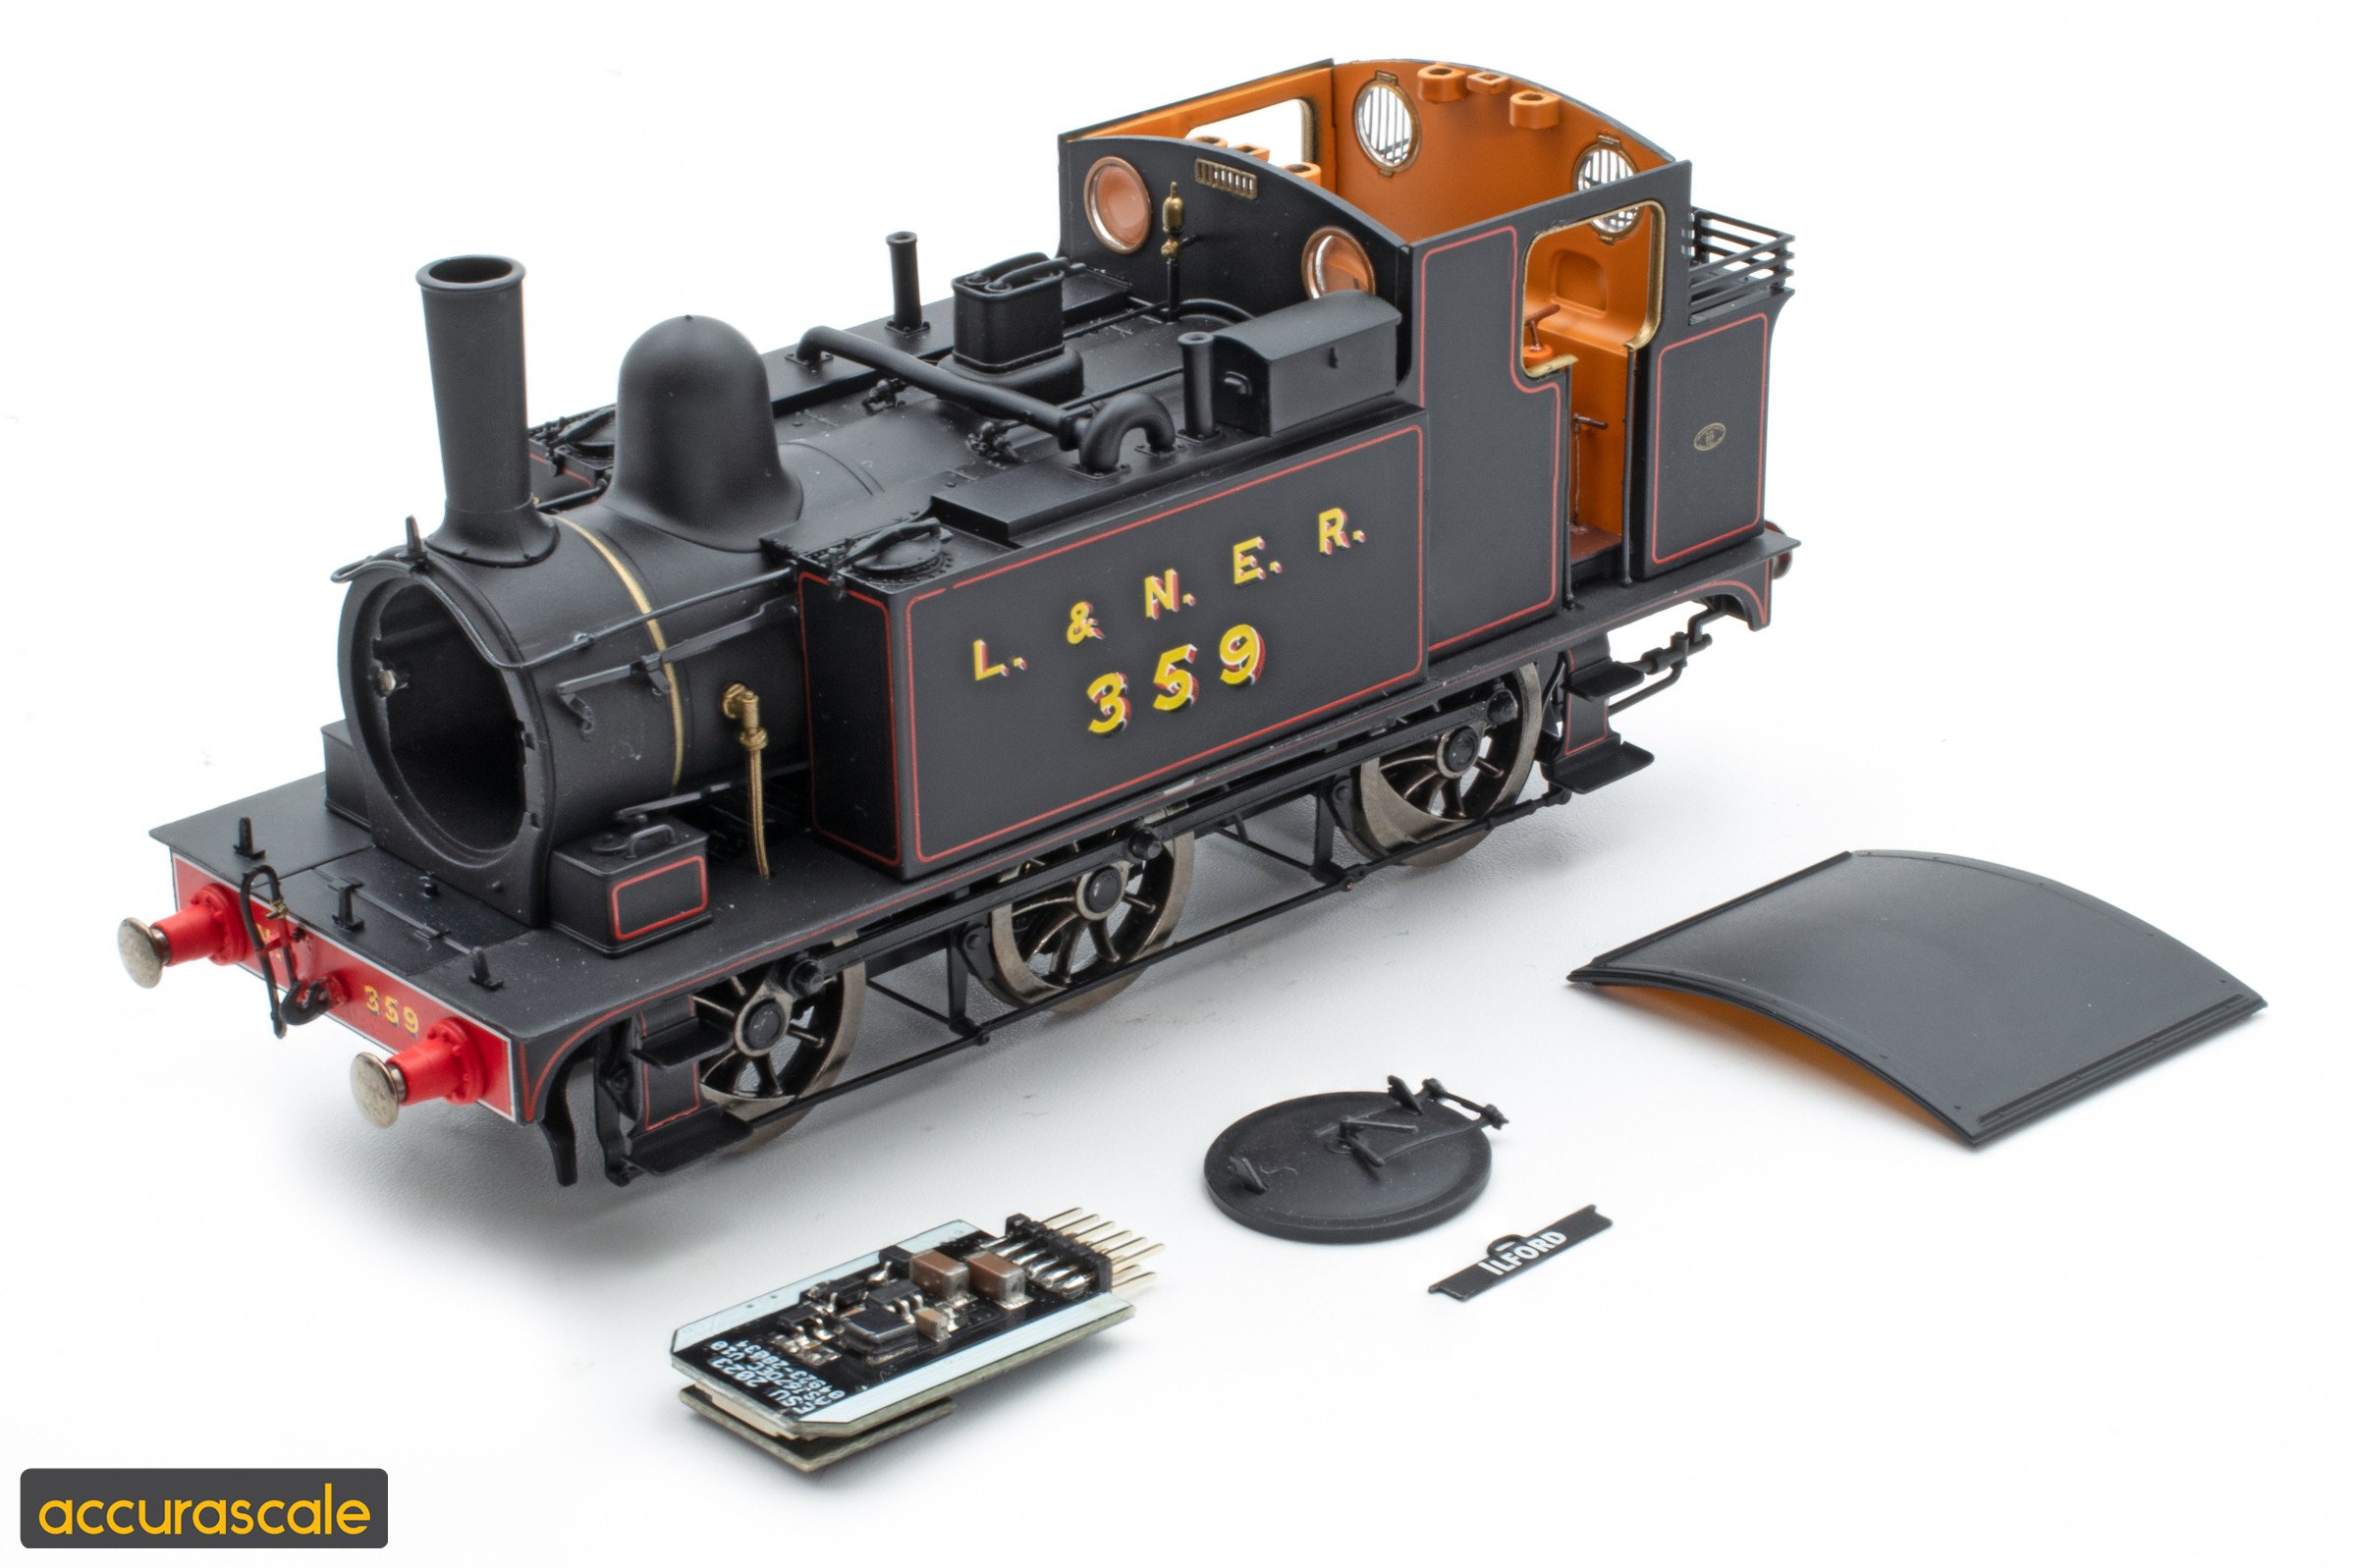 Some items like the smokebox are removable, making fitting of DCC decoders more straightforward.